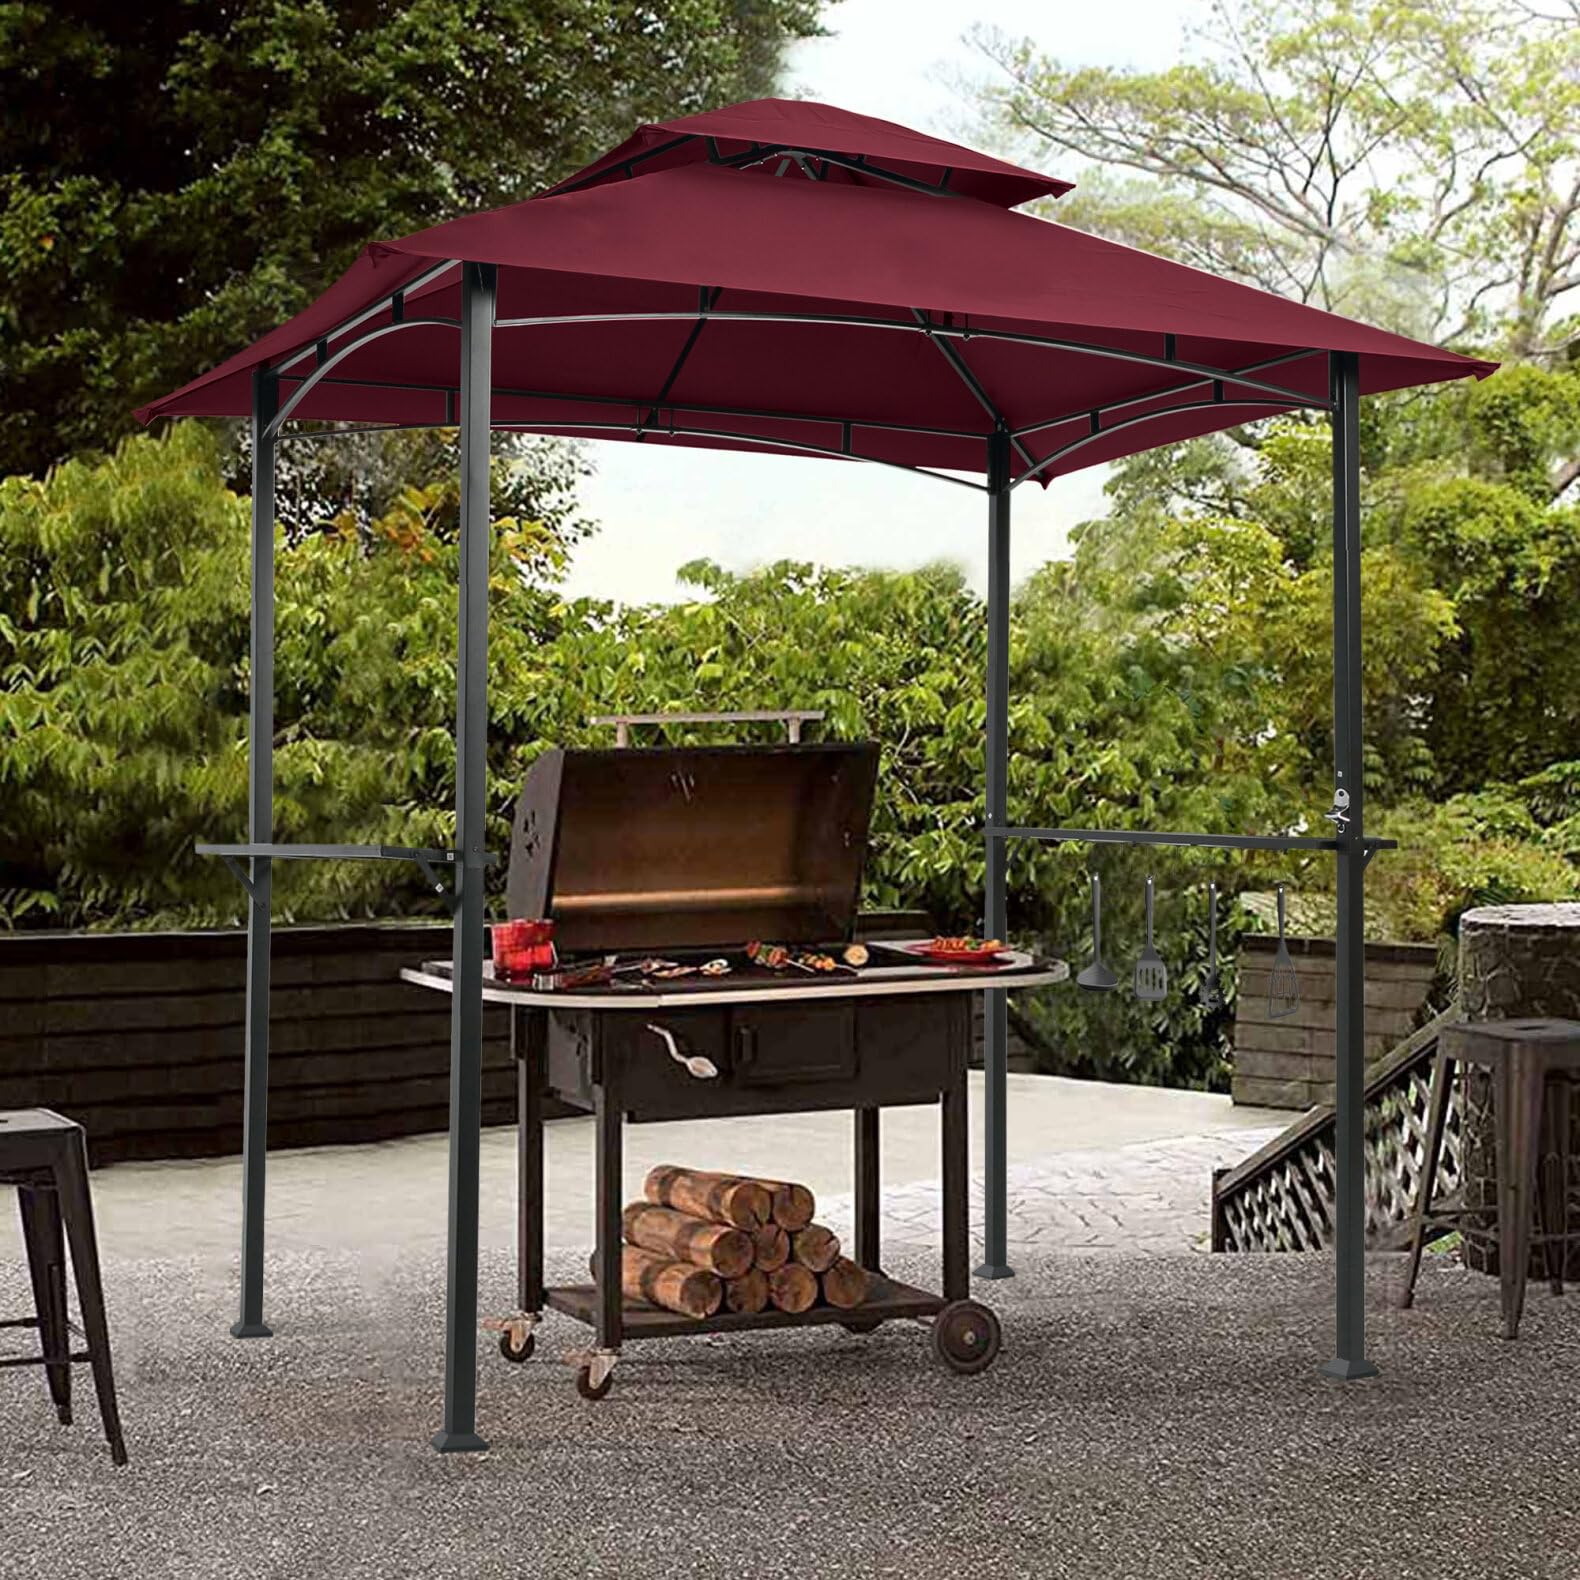 8 x 5 Outdoor Grill Gazebo, Double Tier Grill Canopy with Shelves and Hook, UV Resistant and Waterproof Fabric Grill Awning for Barbecue and Picnic, Burgundy